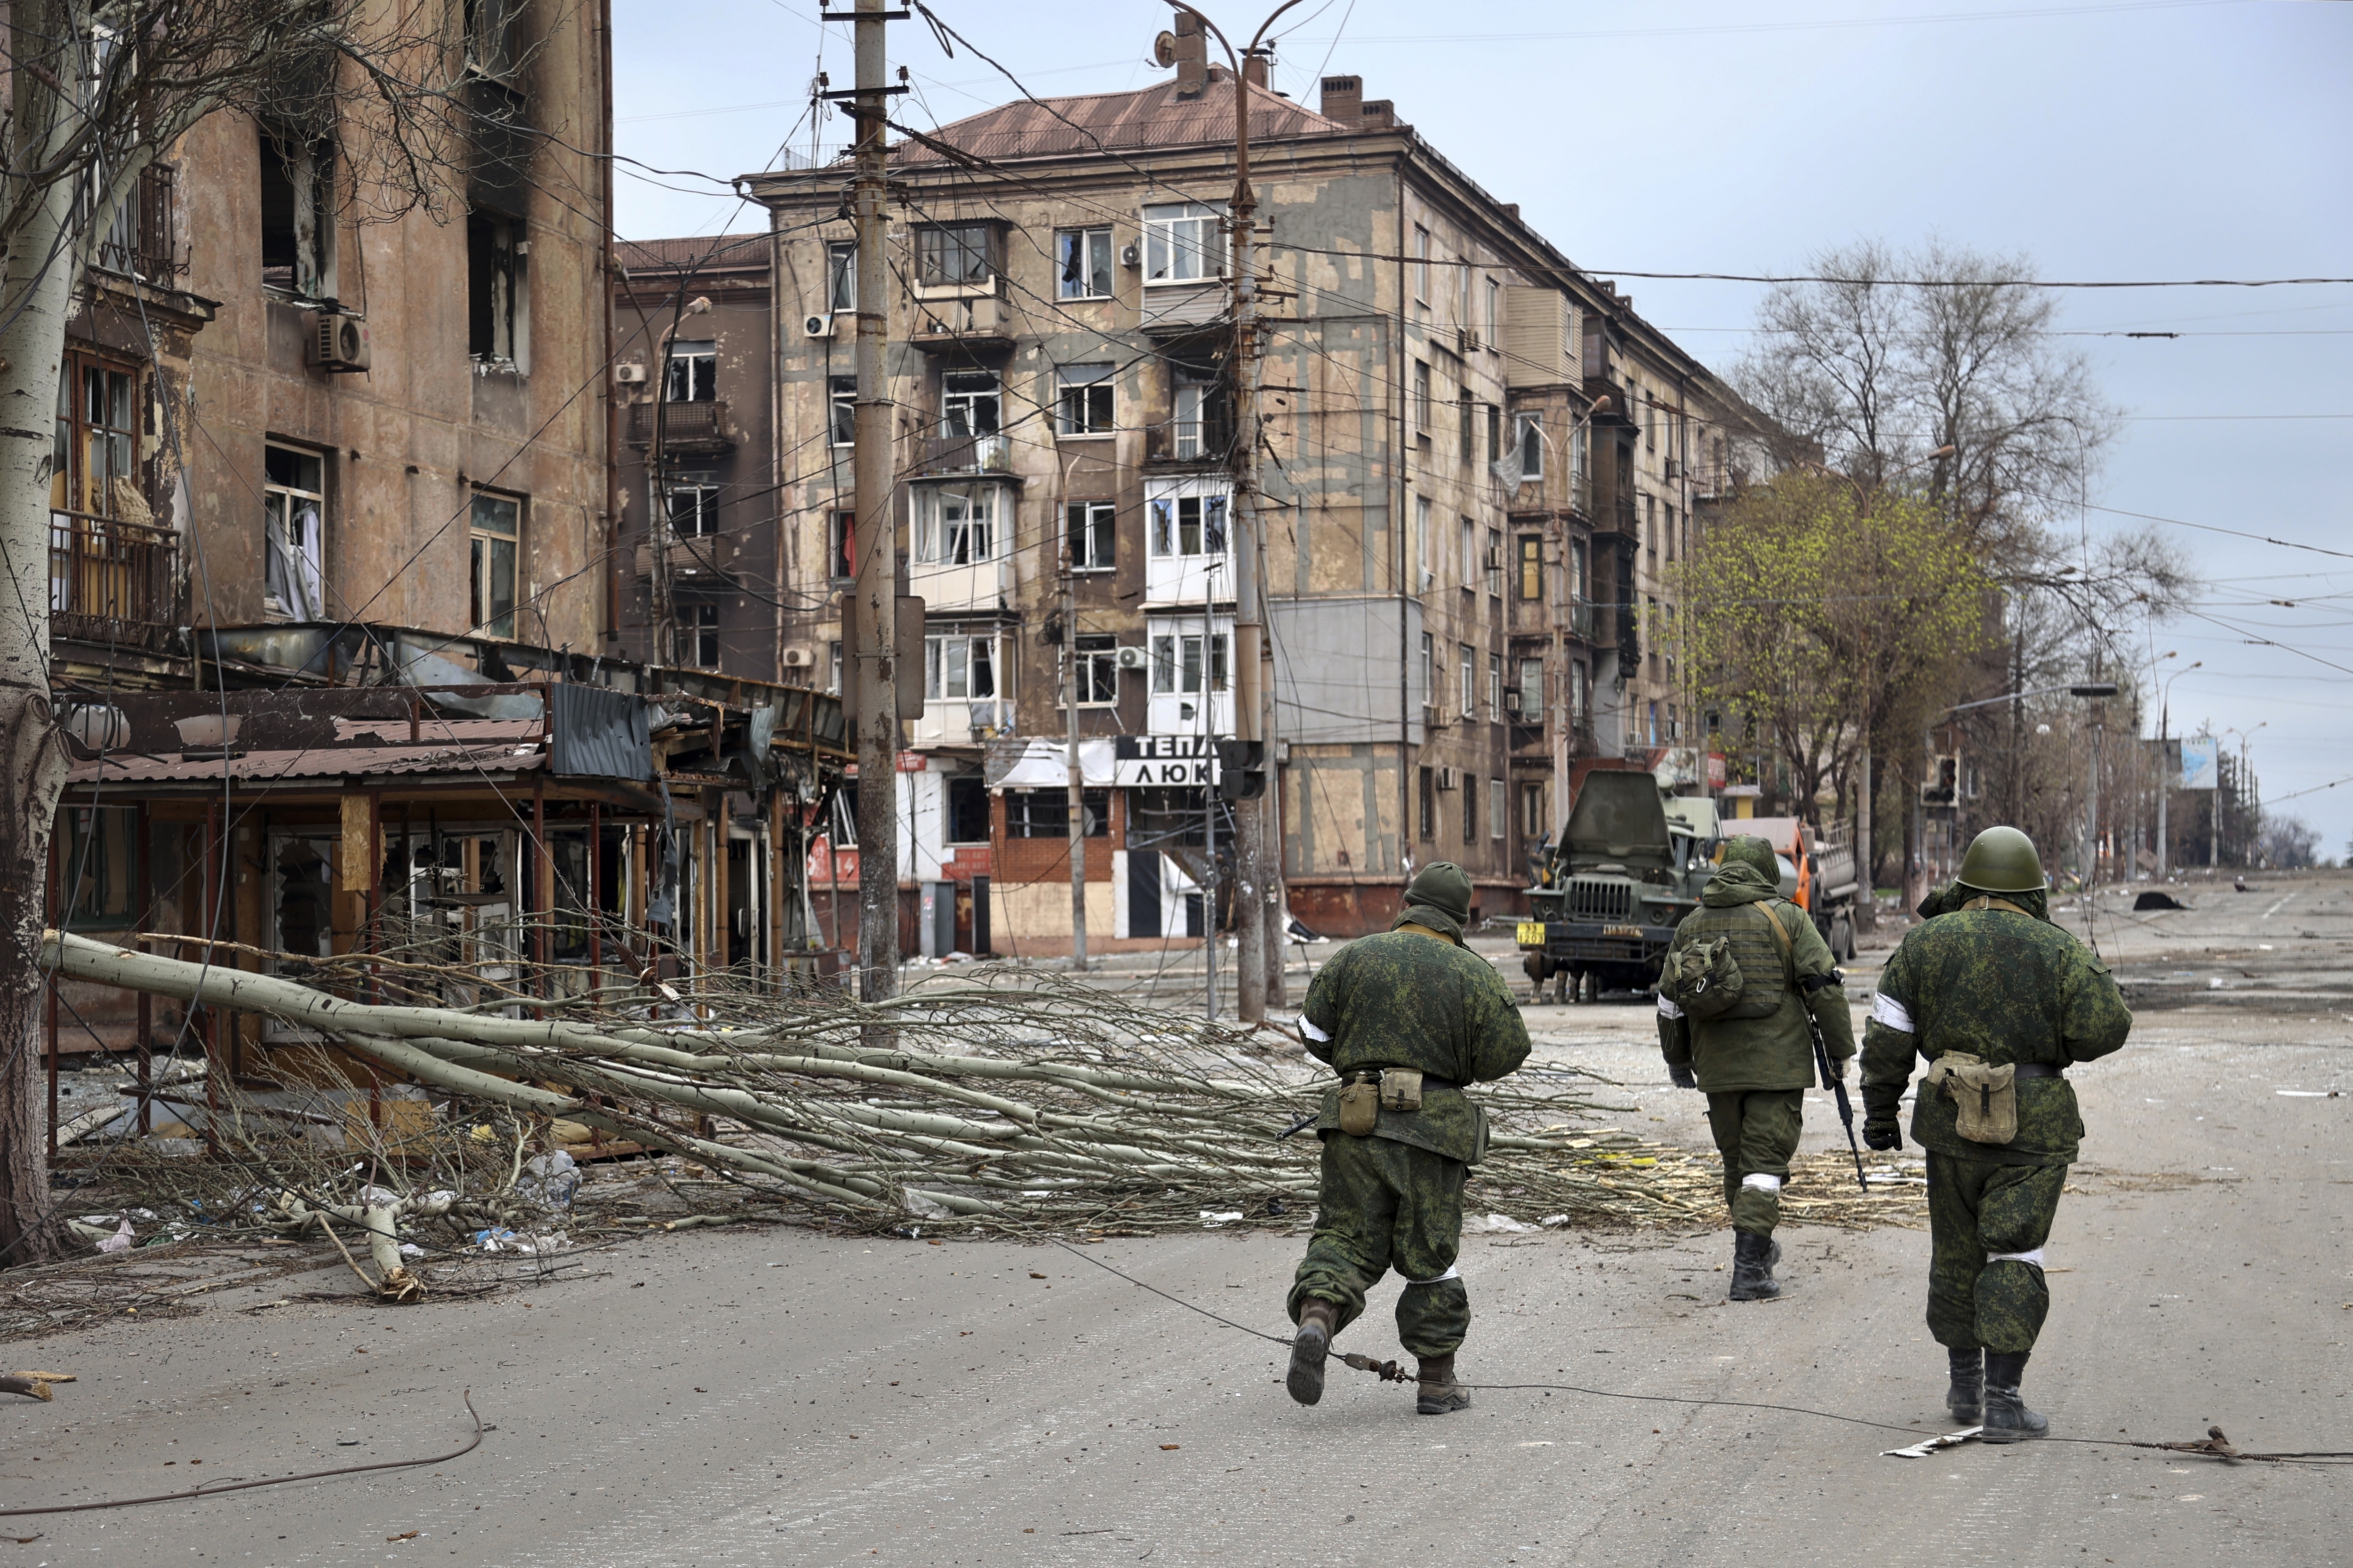 Members of the Donetsk People's Republic militia walk past damaged apartment buildings near the Illich Iron & Steel Works Metallurgical Plant in Mariupol, Ukraine, on April 16.